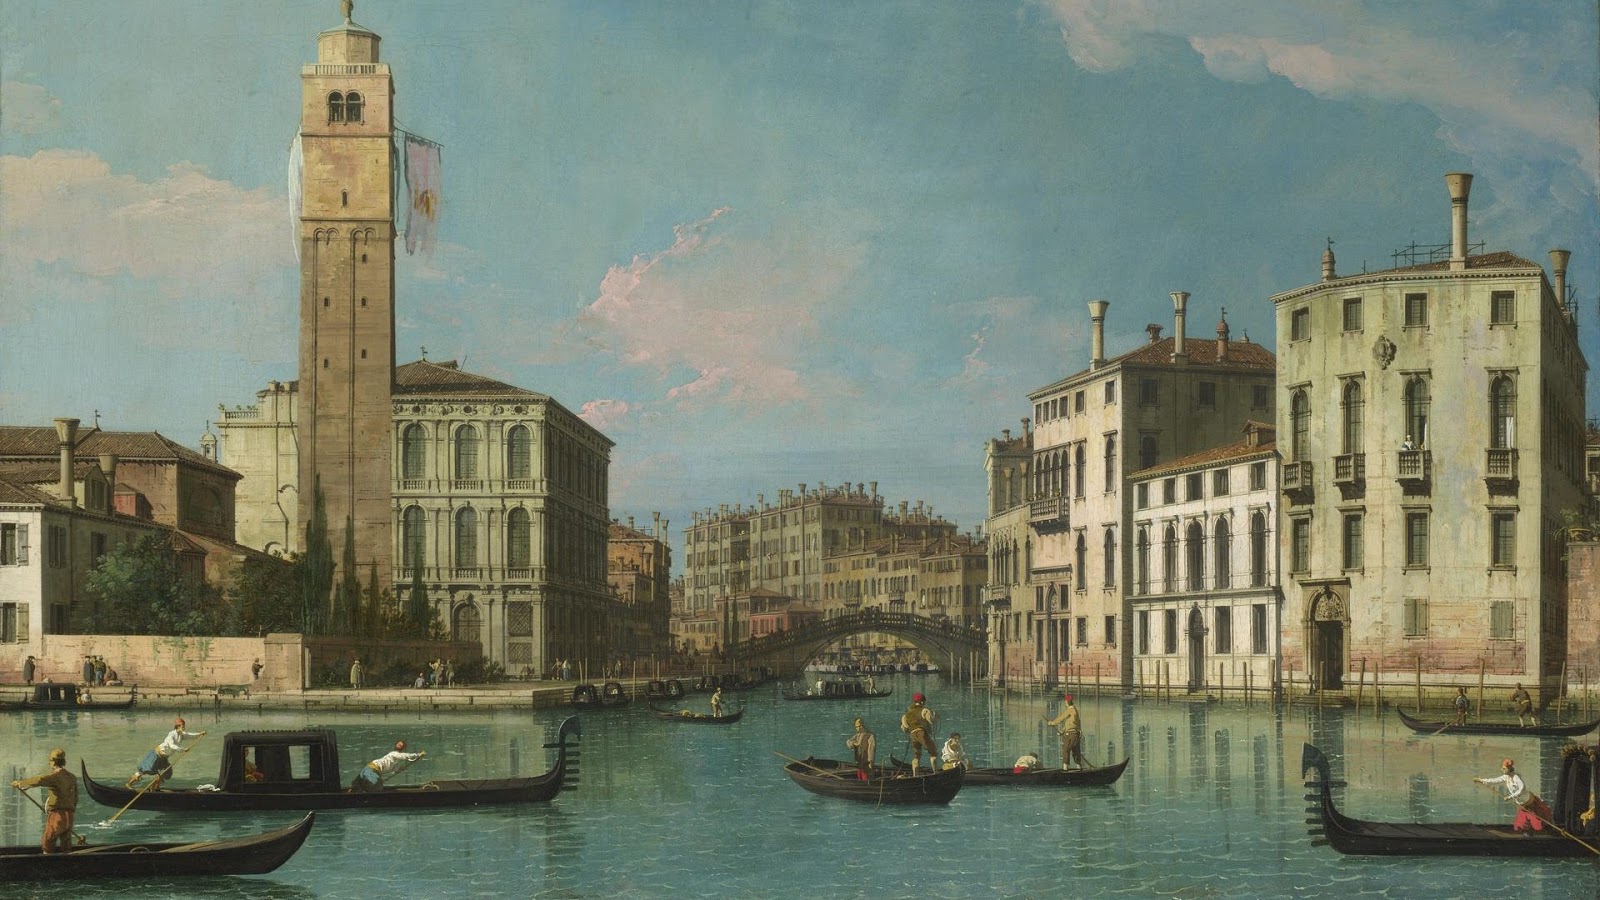 Canaletto-1697-1768 (40).jpg